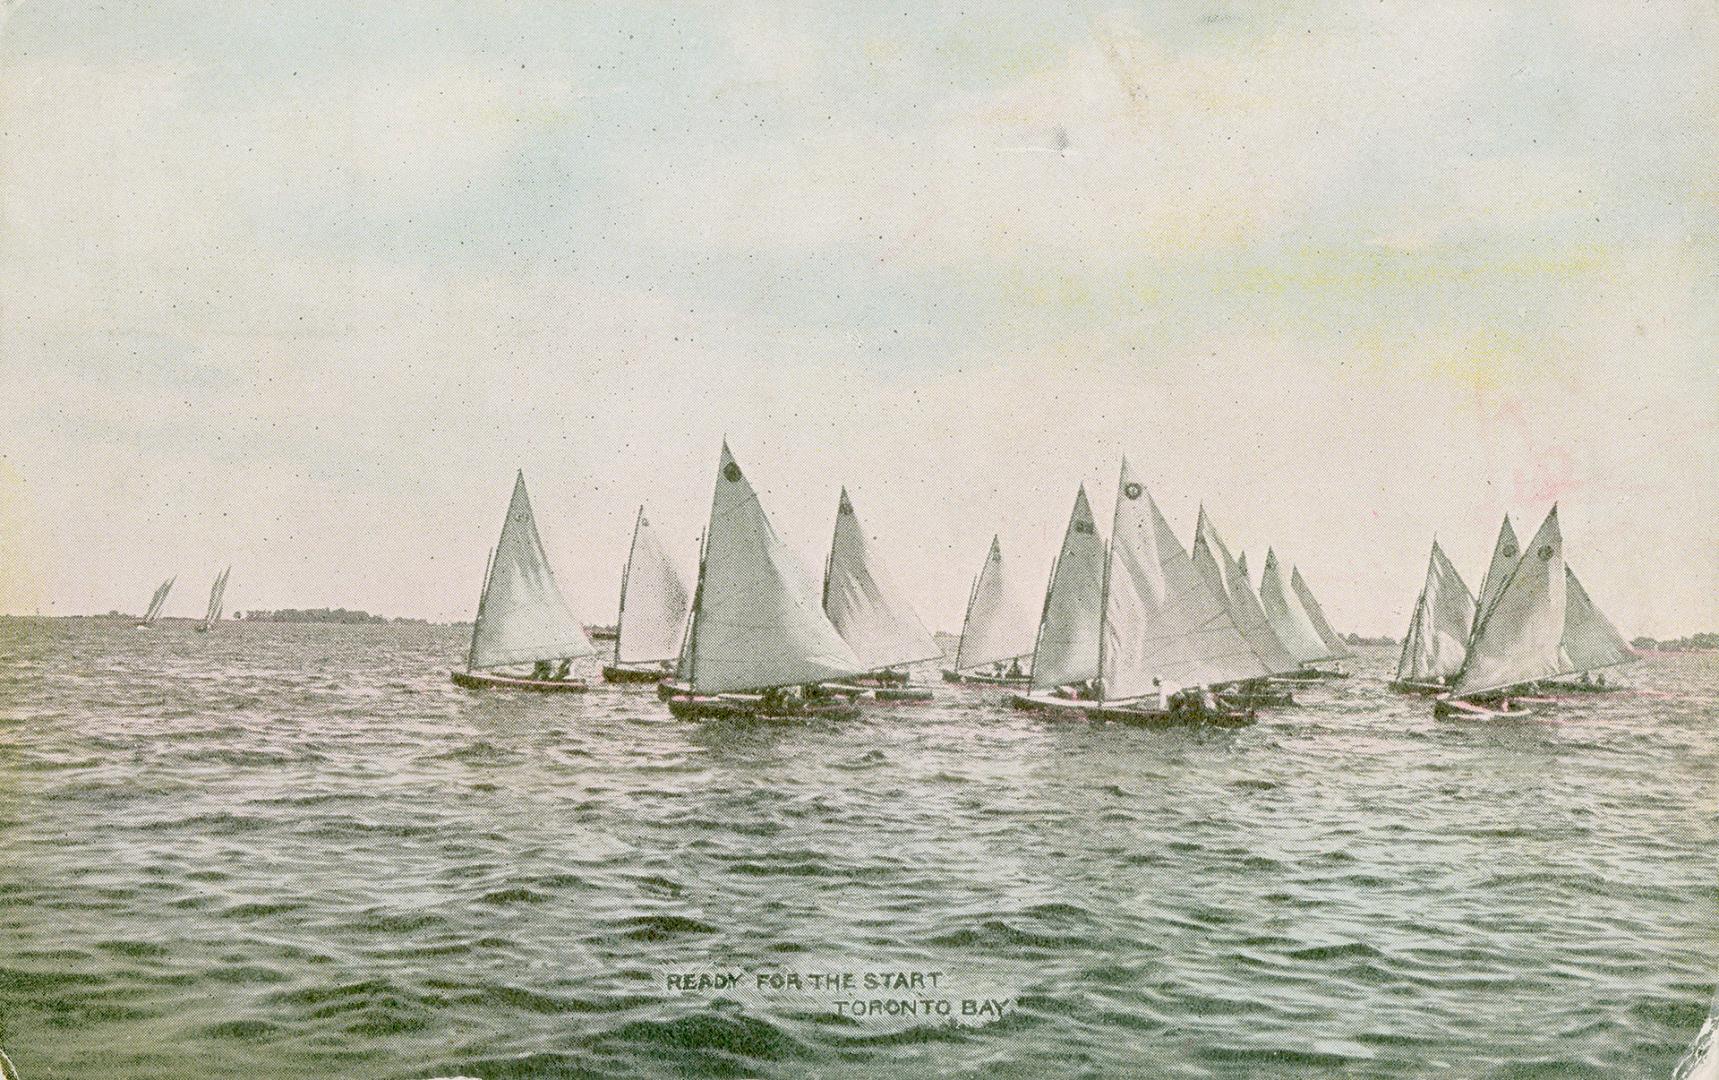 Image shows a number of boats on the lake.